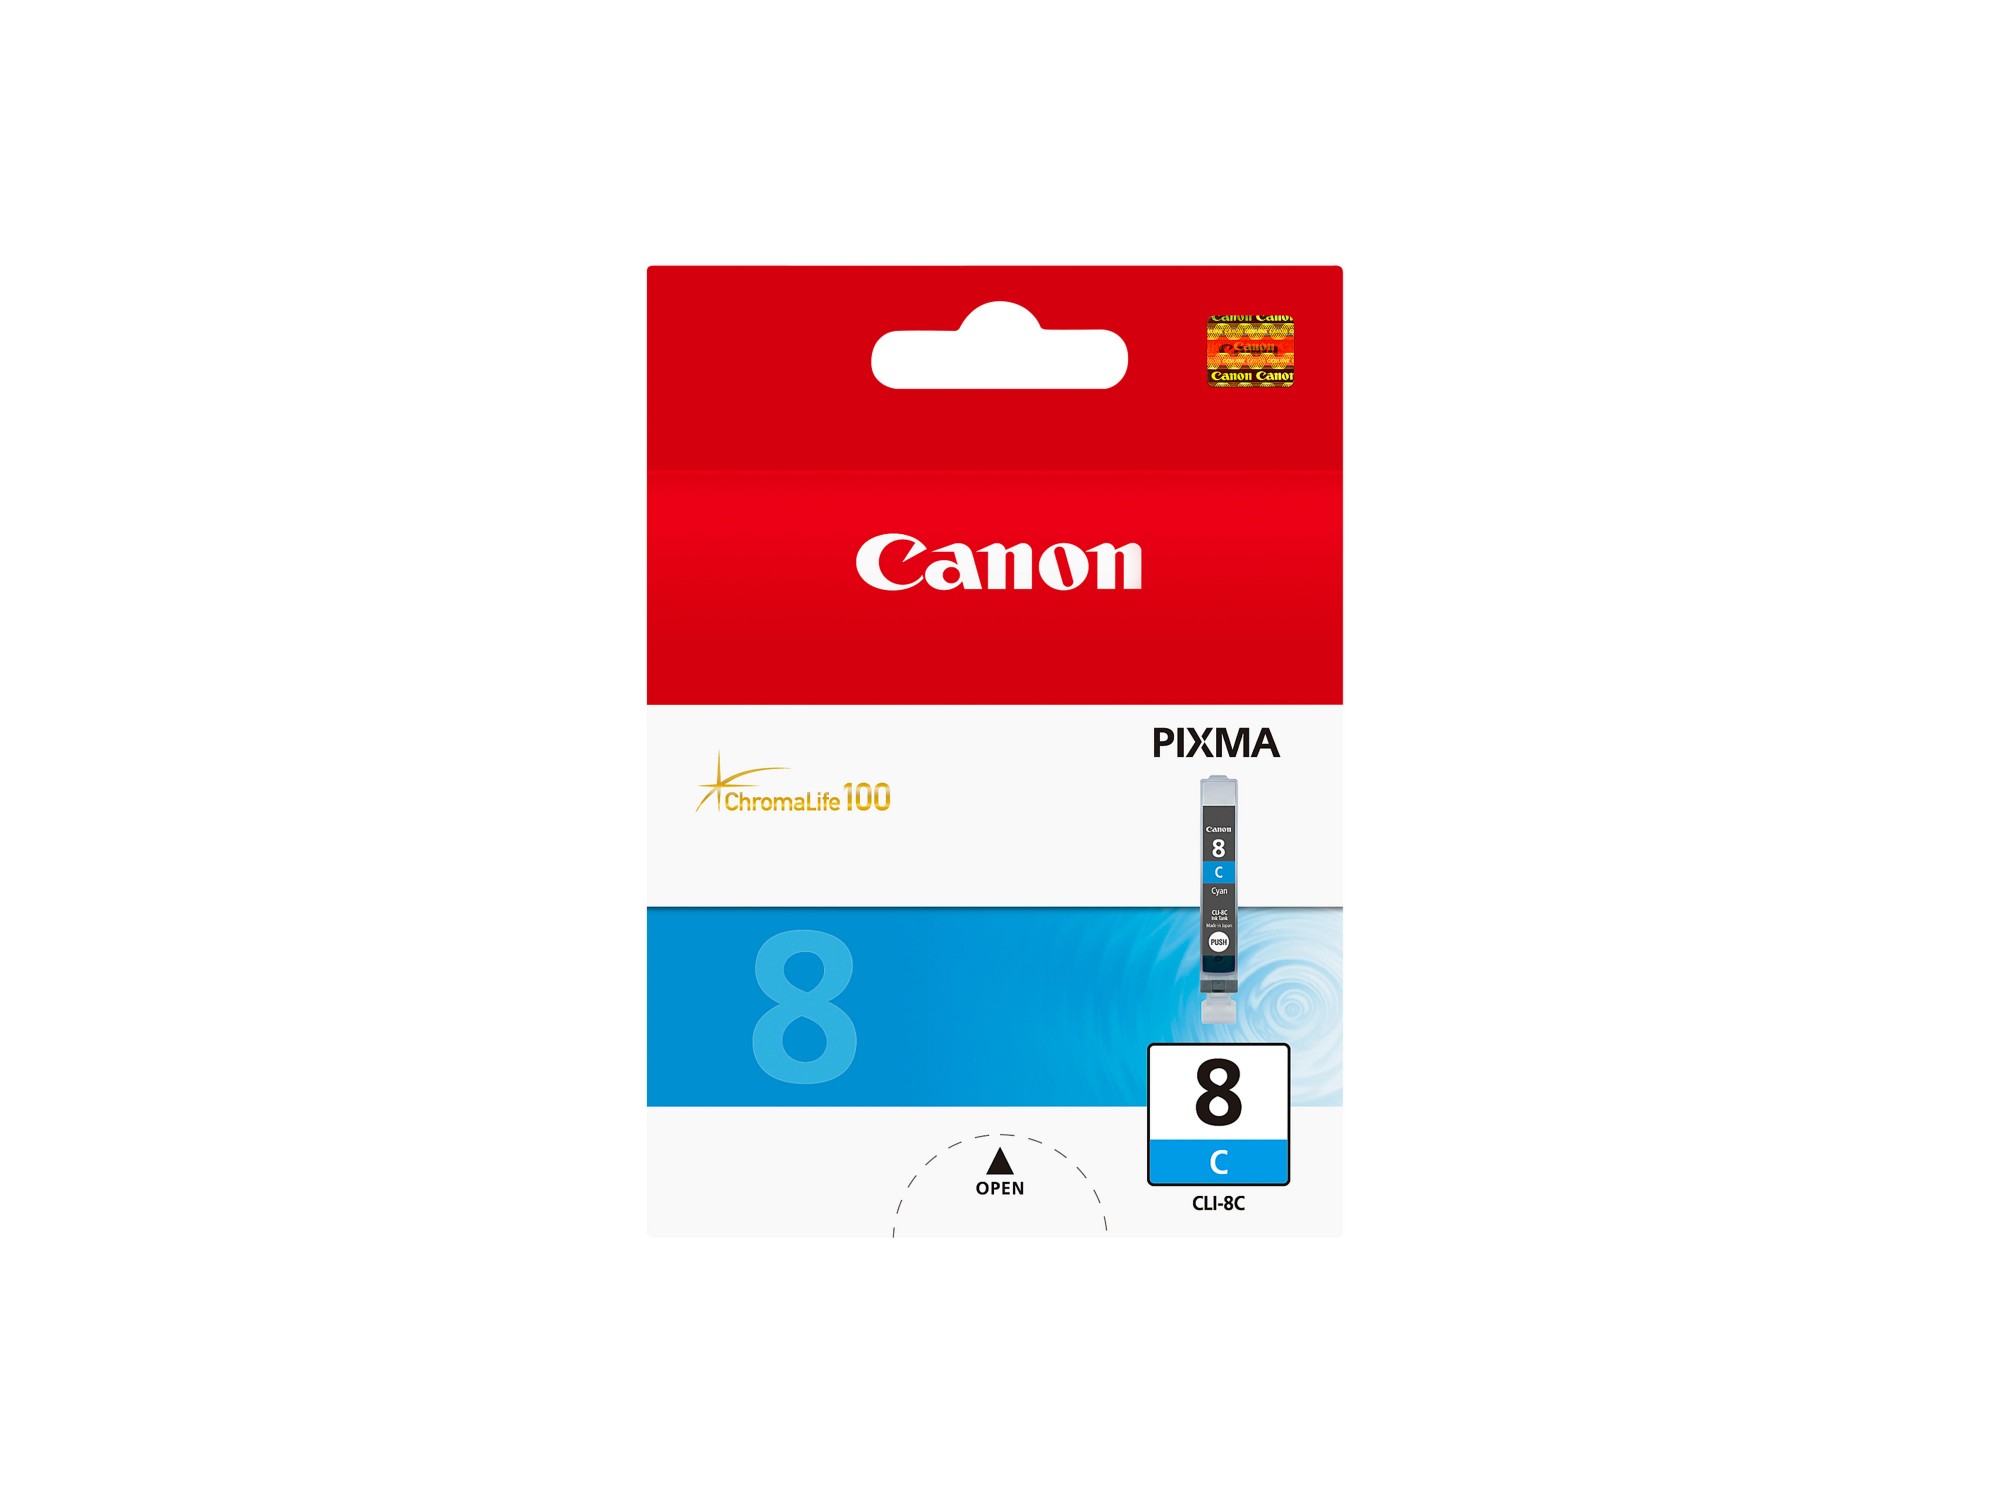 Canon 0621B001|CLI-8C Ink cartridge cyan, 420 pages ISO/IEC 24711 13ml for Canon Pixma IP 3300/4200/6600/MP 960/Pro 9000